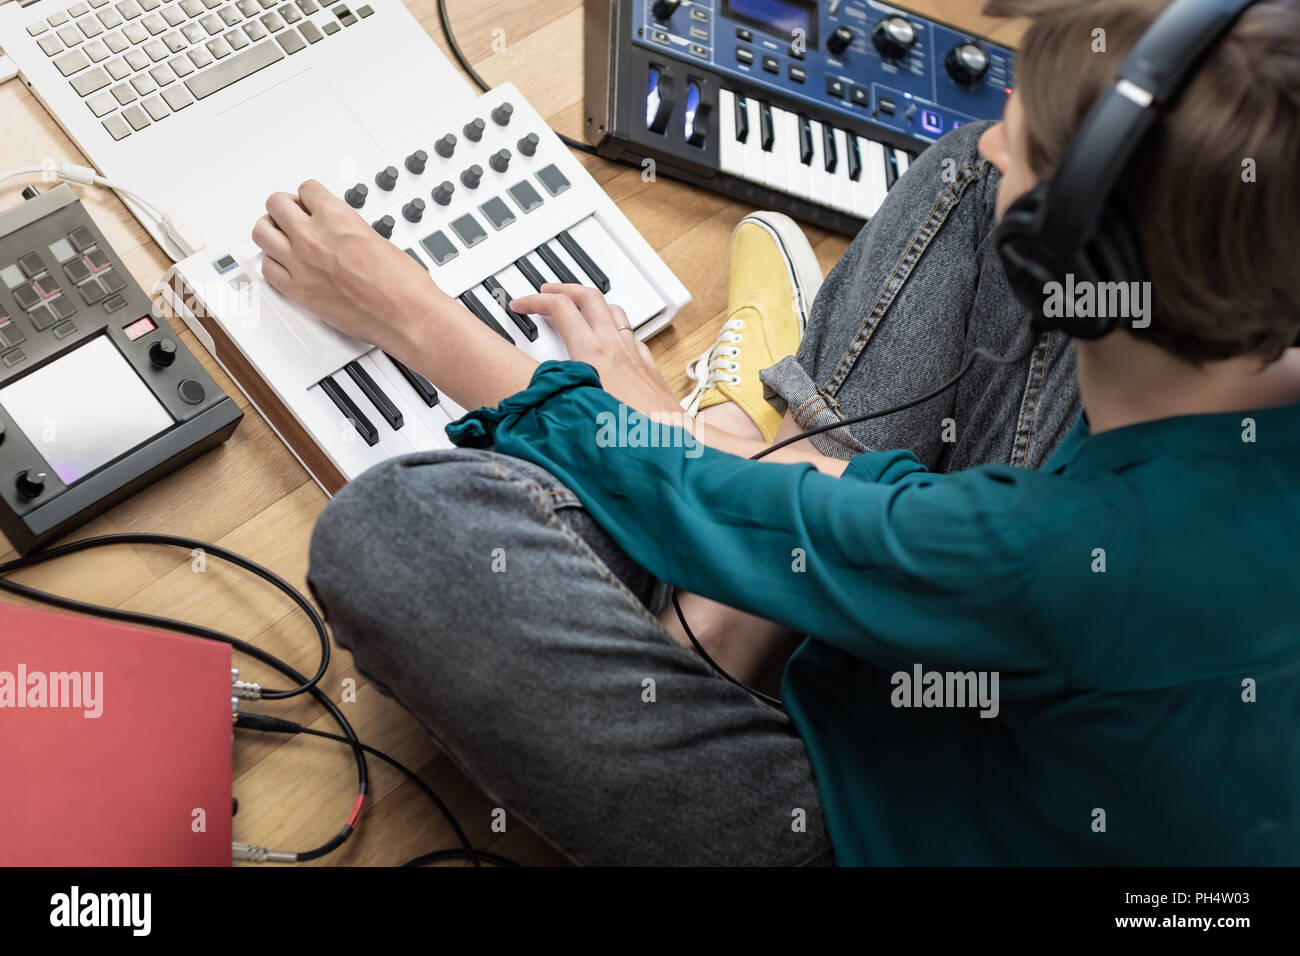 Music studio full of instruments and pc display Stock Photo - Alamy